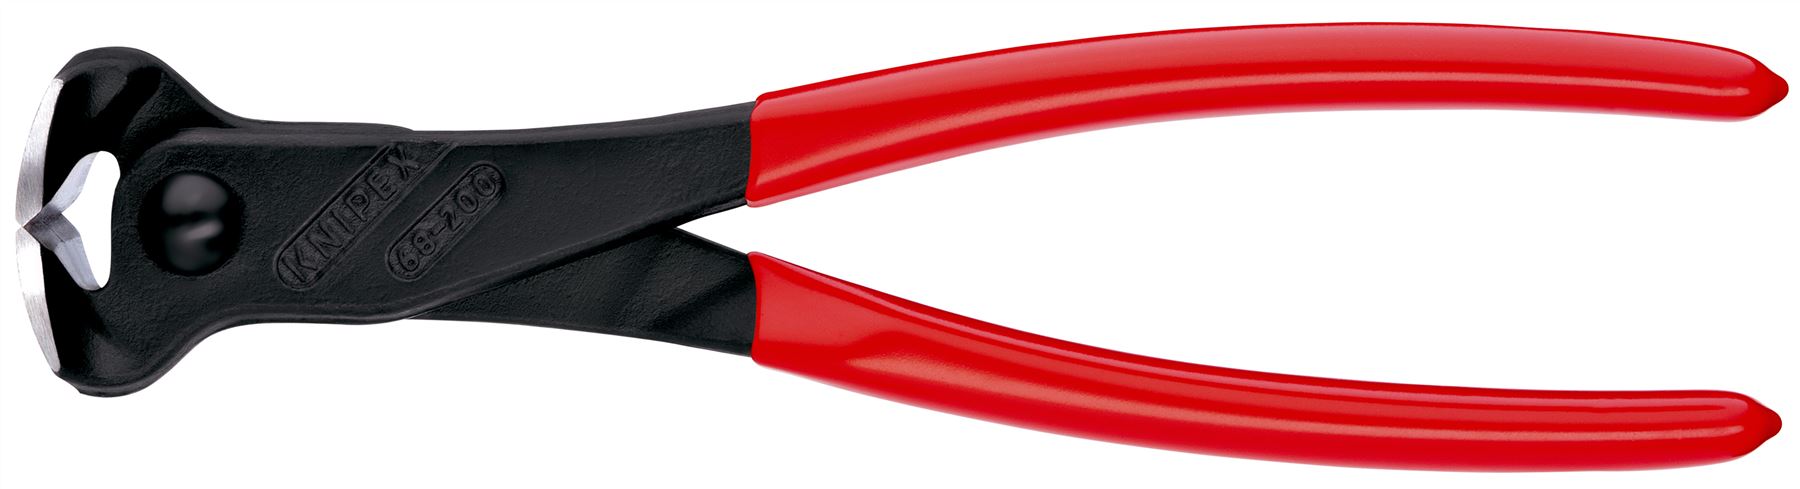 Knipex End Cutting Nippers Pliers 200mm 68 01 200